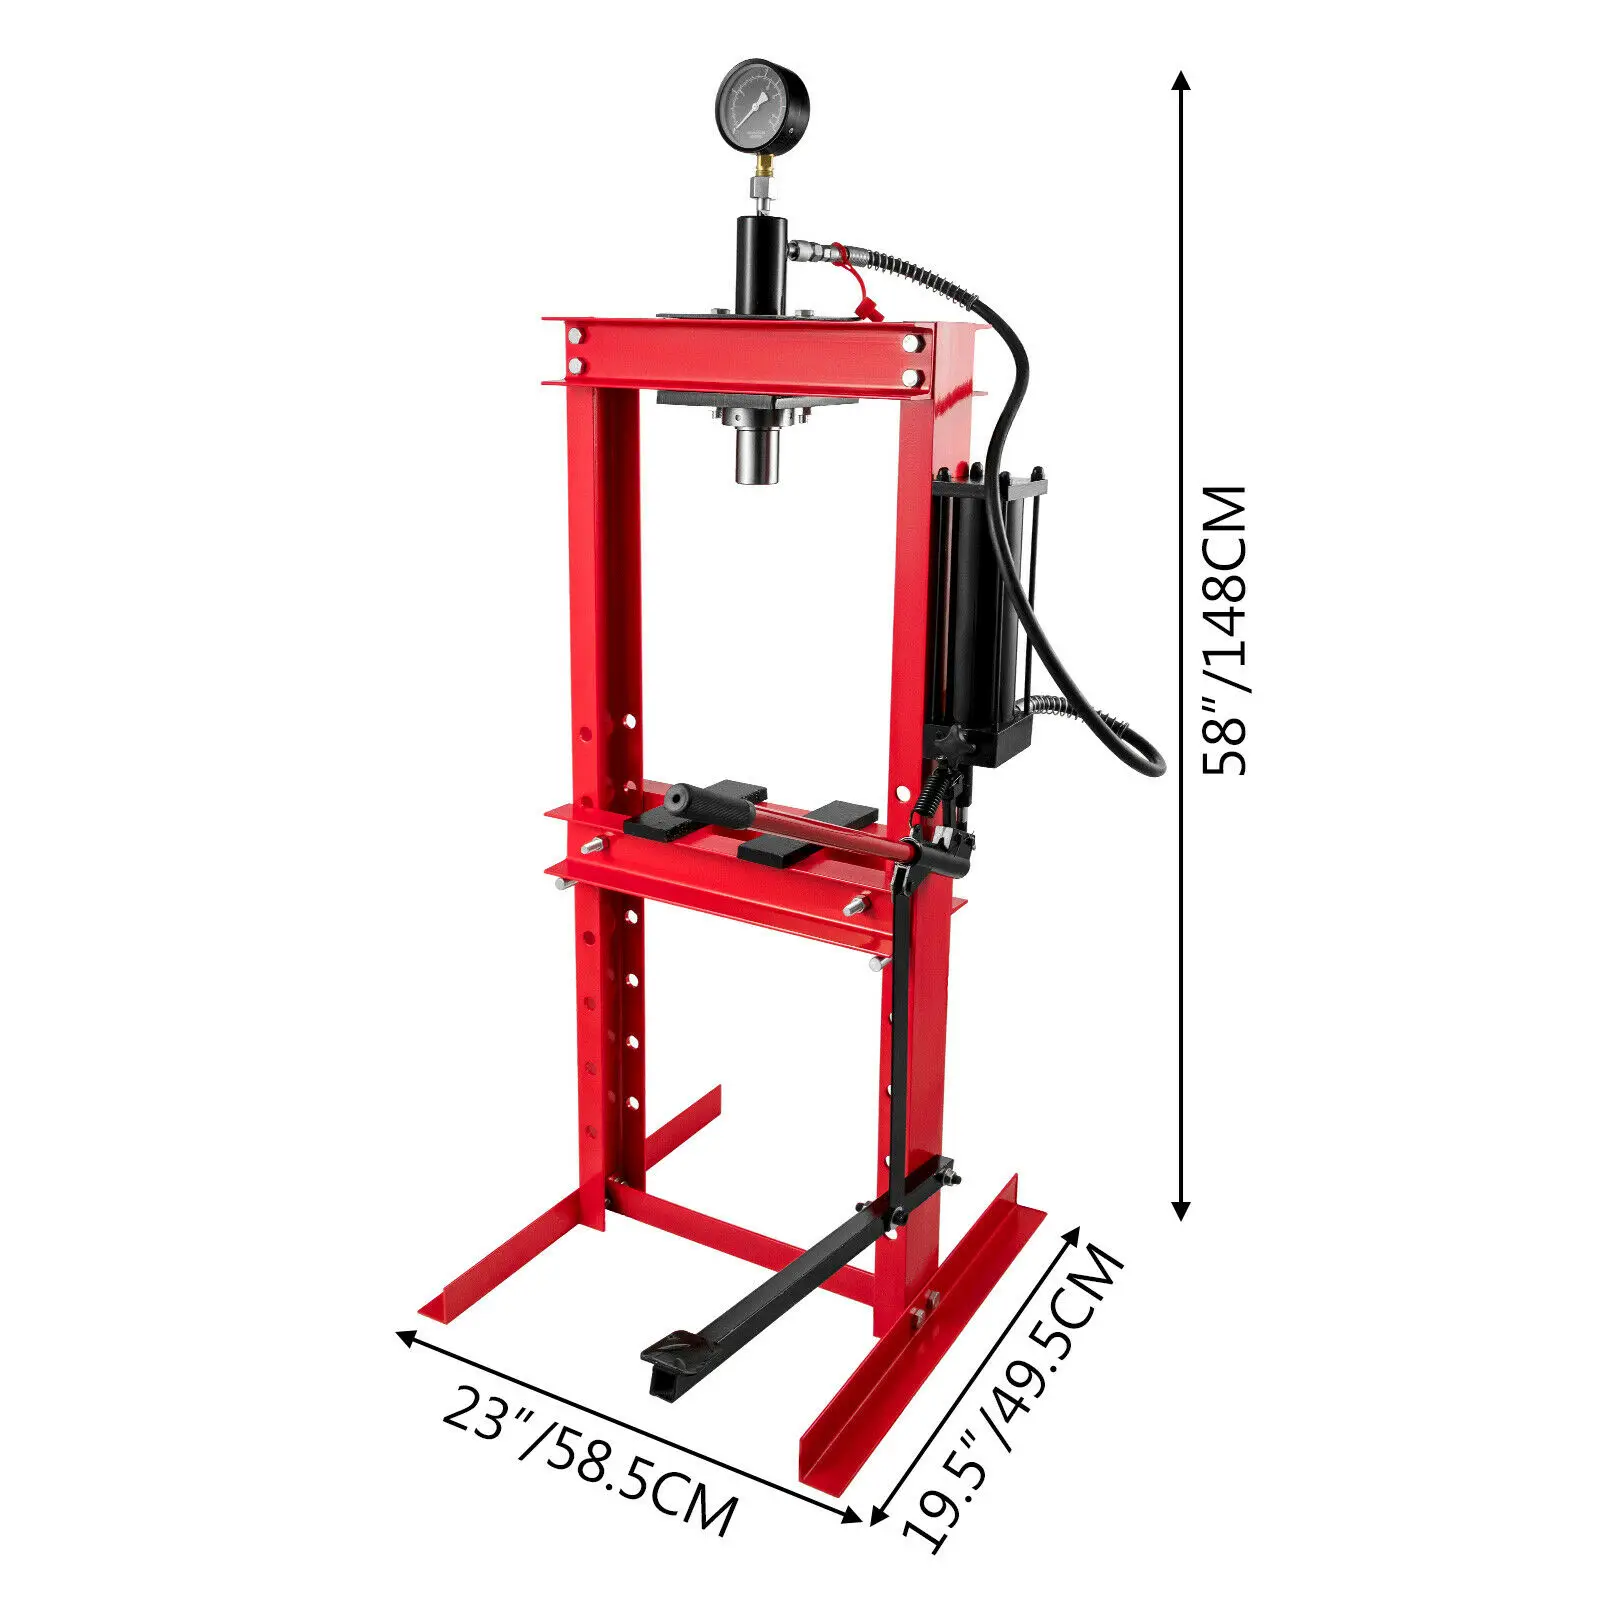 87cm Husuper Hydraulic Press 12 Ton Hydraulic Shop Floor Press 26455 lb w/with Heavy Duty Steel Plates and H Frame Working Distance 34 Top Mount for Gears and Bearings 